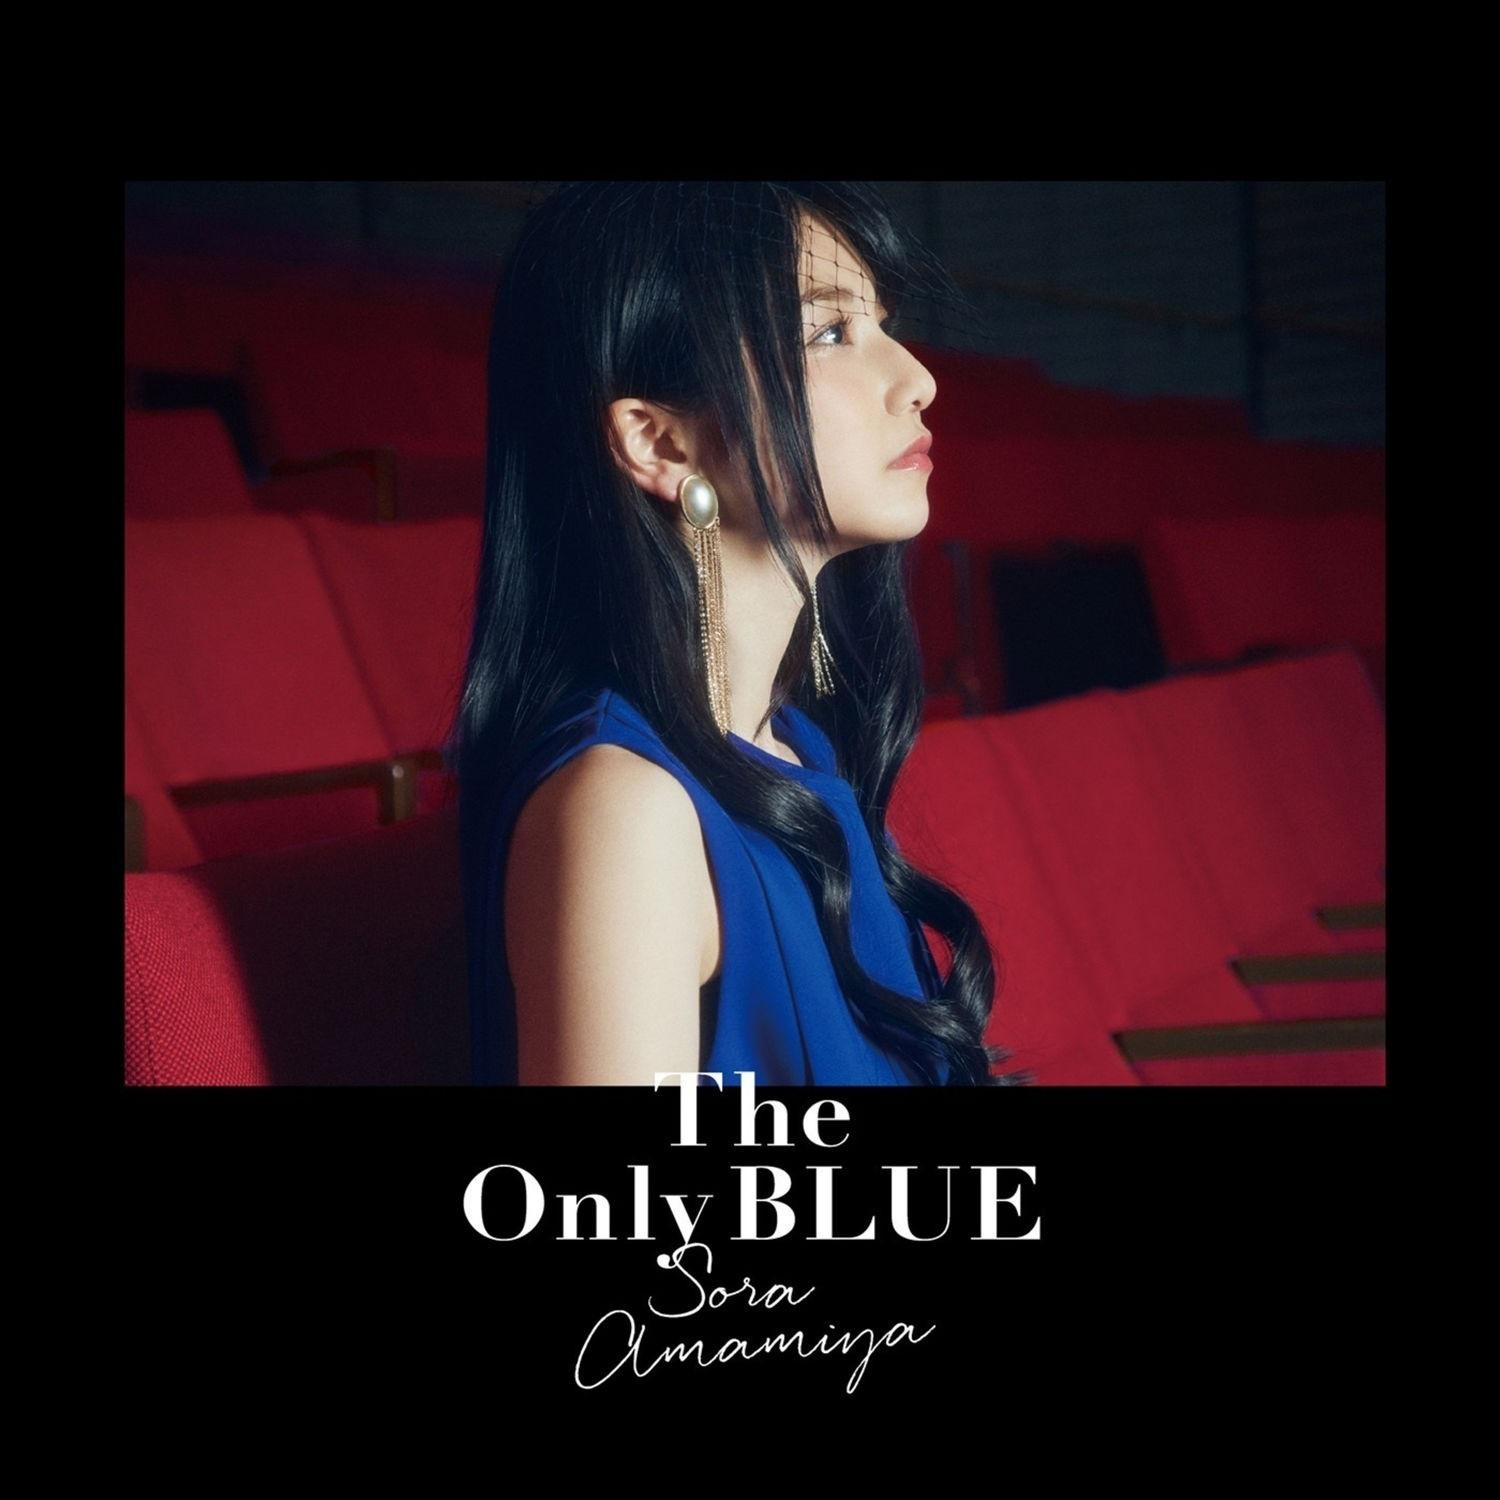 The Only BLUE专辑